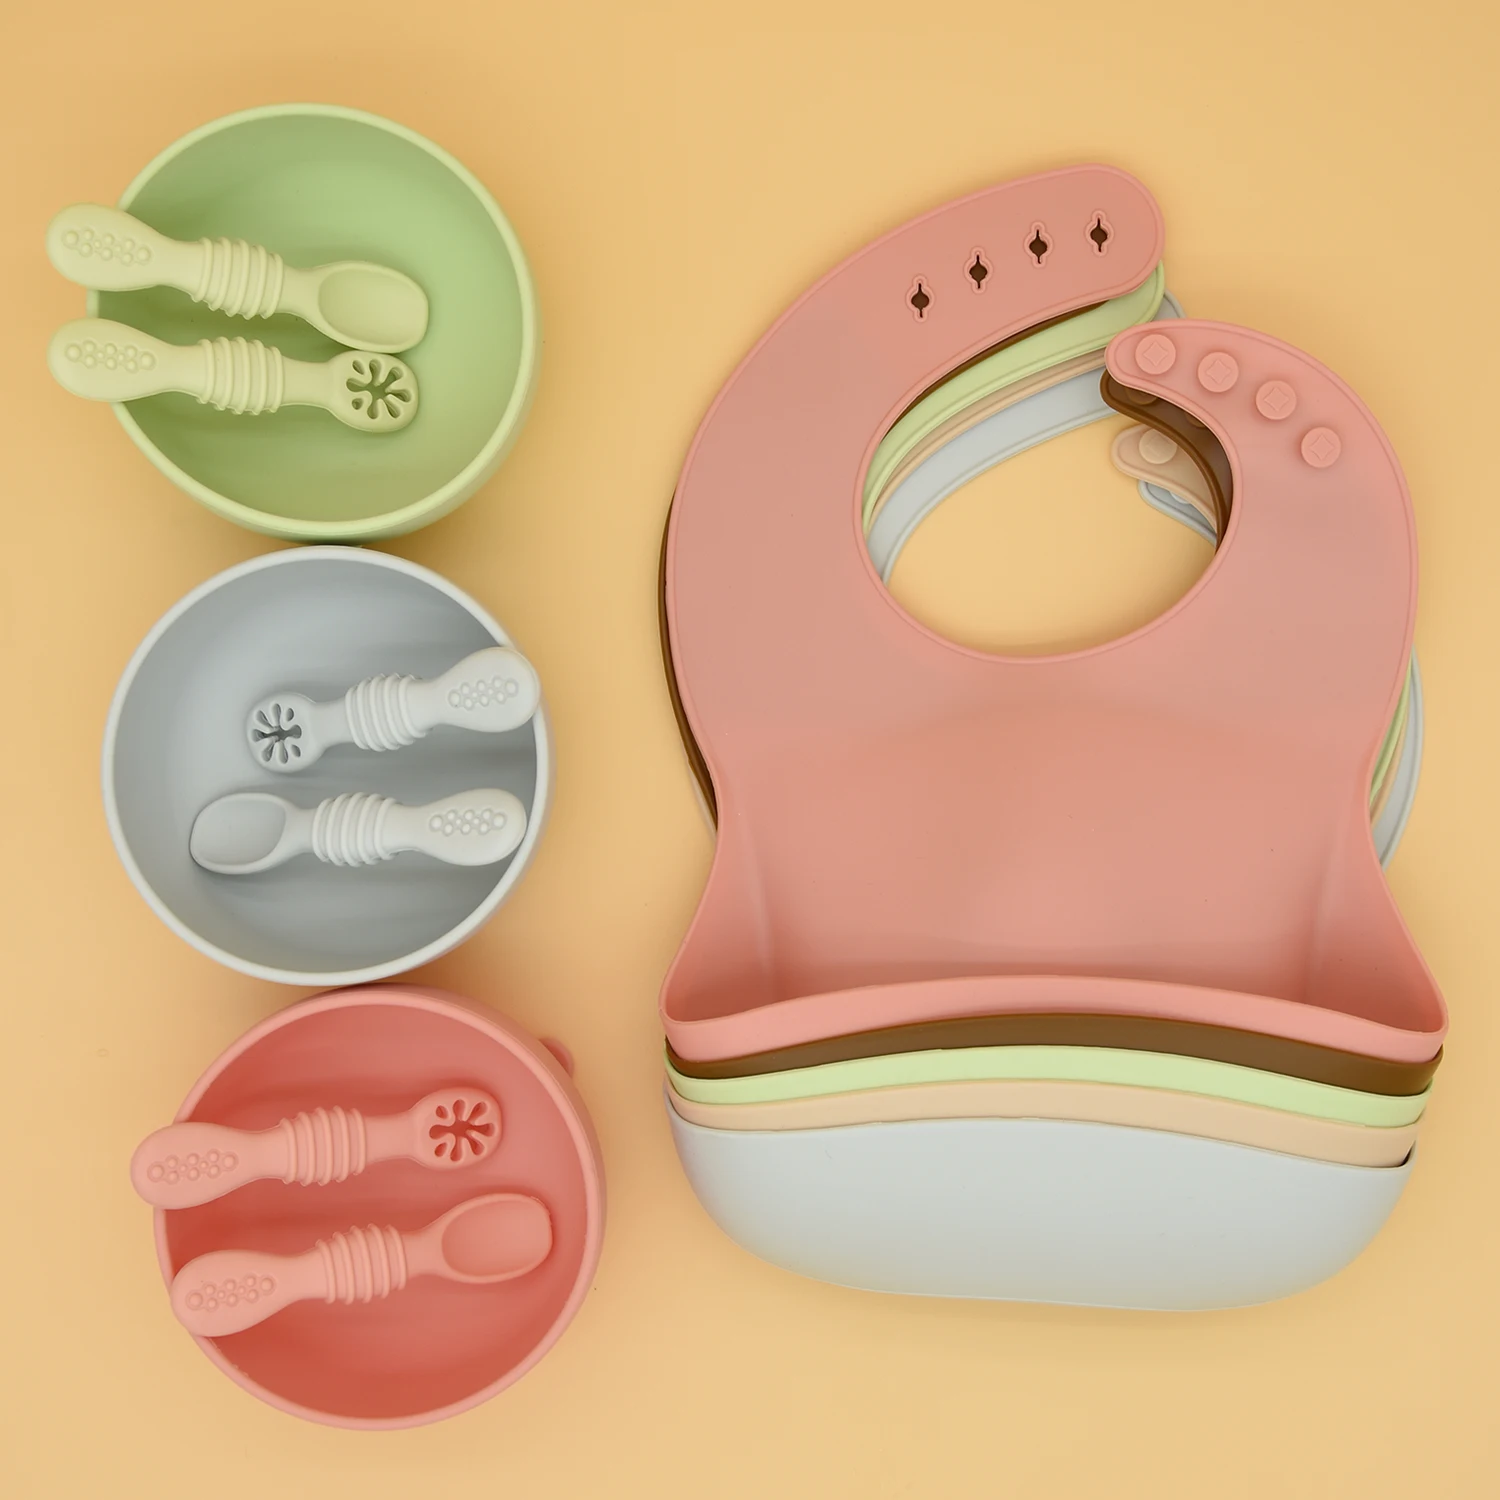 

Soft Waterproof Silicone Baby Bib with Food Catcher, Baby Silicone Bib, All colors from pantone